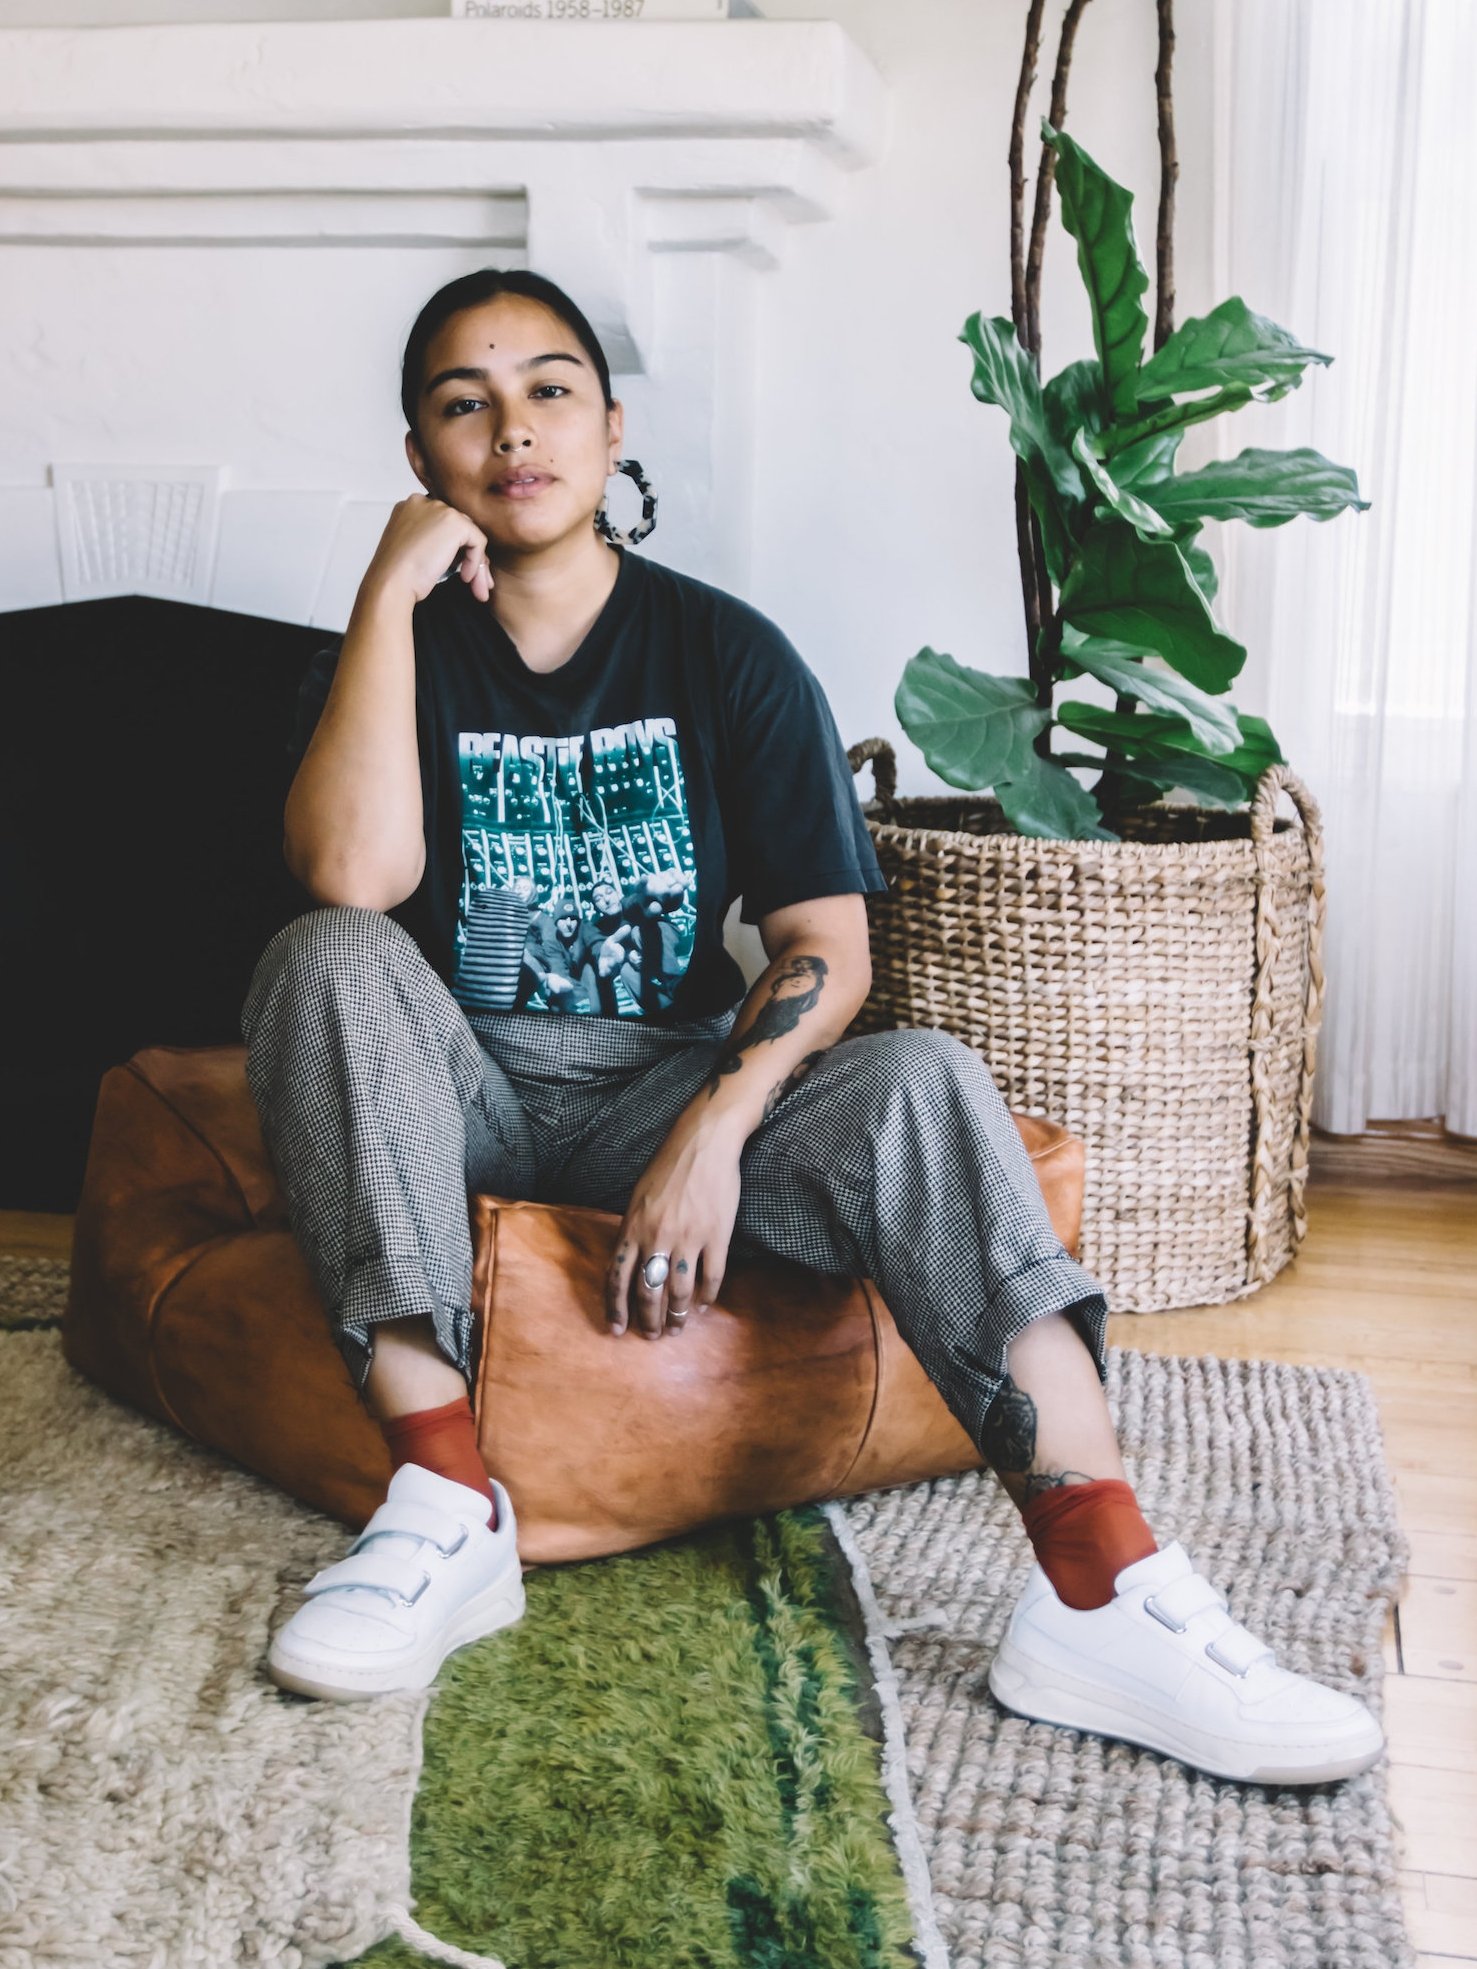 Week Of Outfits Series: A Week Of Super-Chill Conscious Fashion With Isadora Alvarez, Founder Of Back Beat Co.